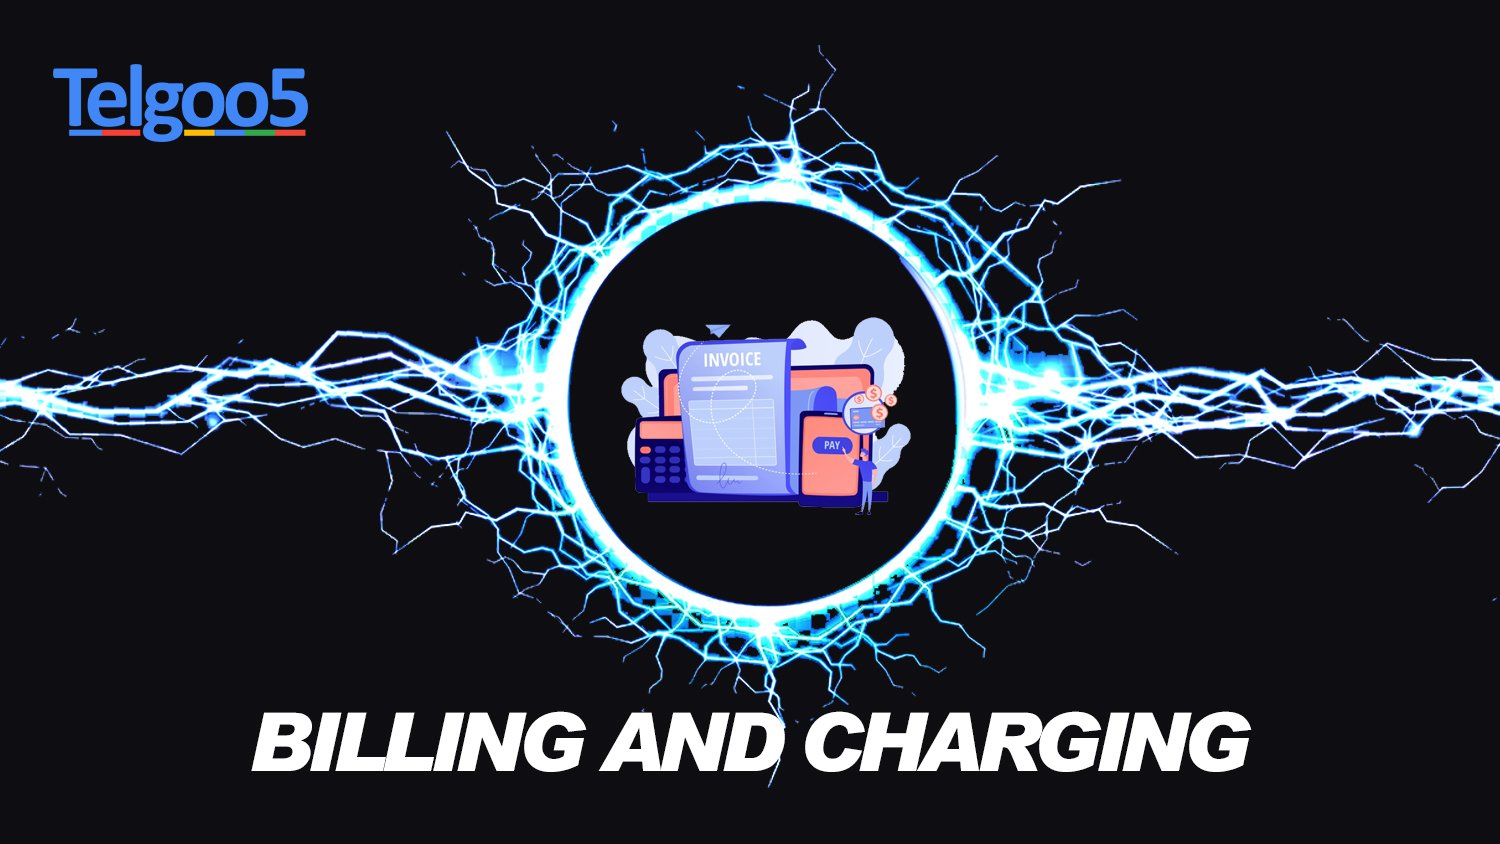 Billing and Charging